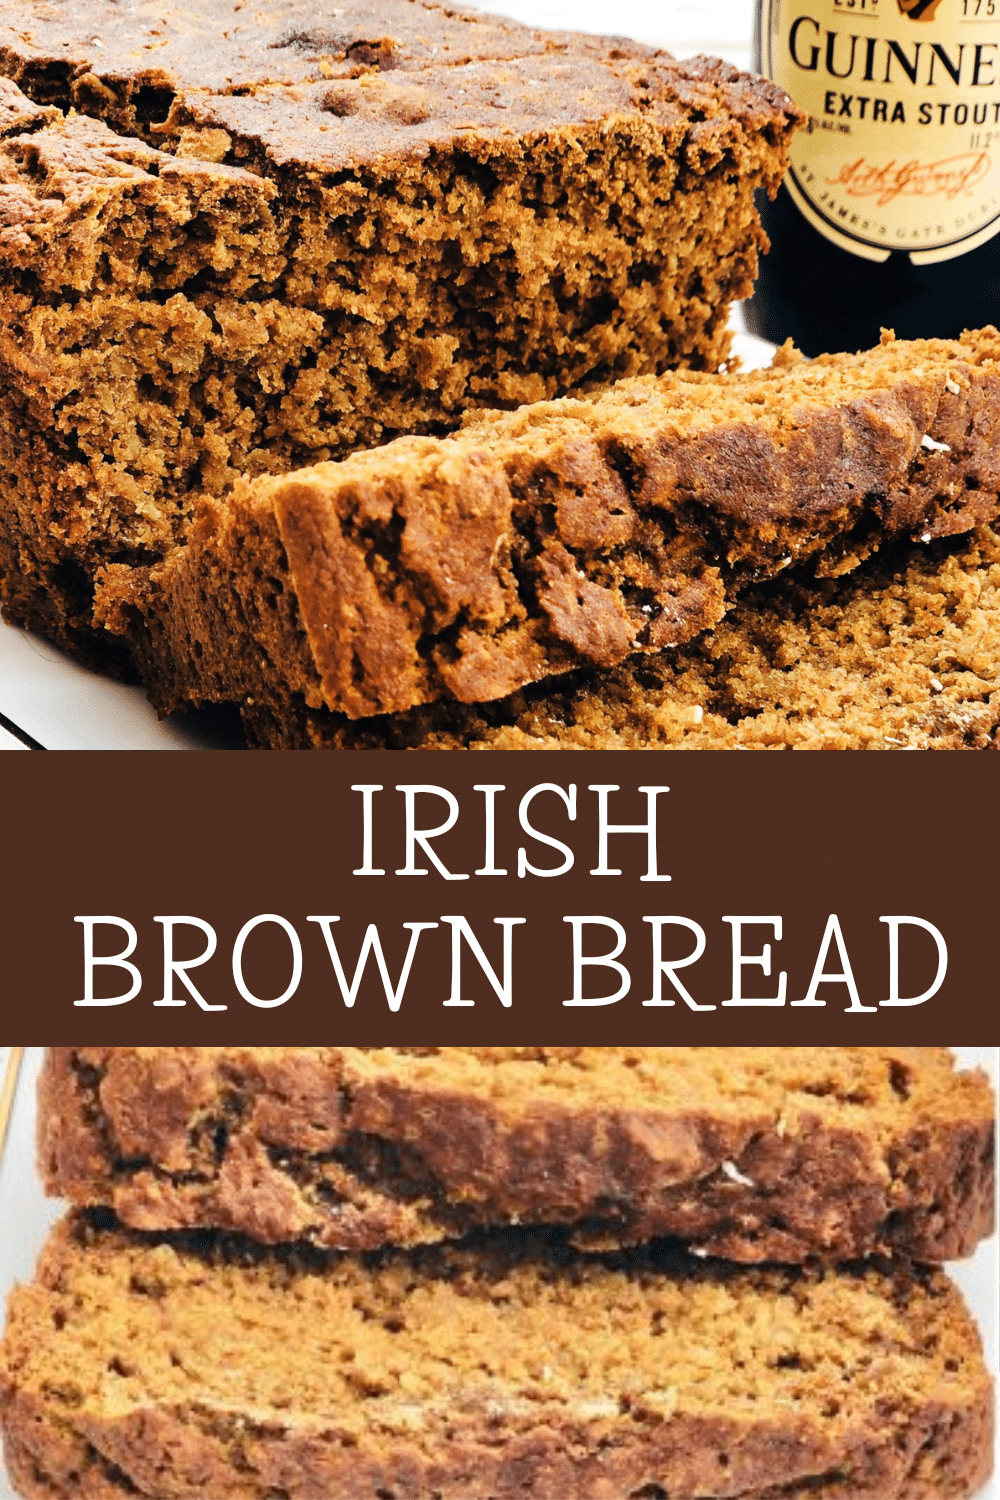 Irish Brown Bread ~ This easy-to-make bread is hearty, earthy, and rustic. A perfect addition to your St. Patrick's Day feast!  via @thiswifecooks